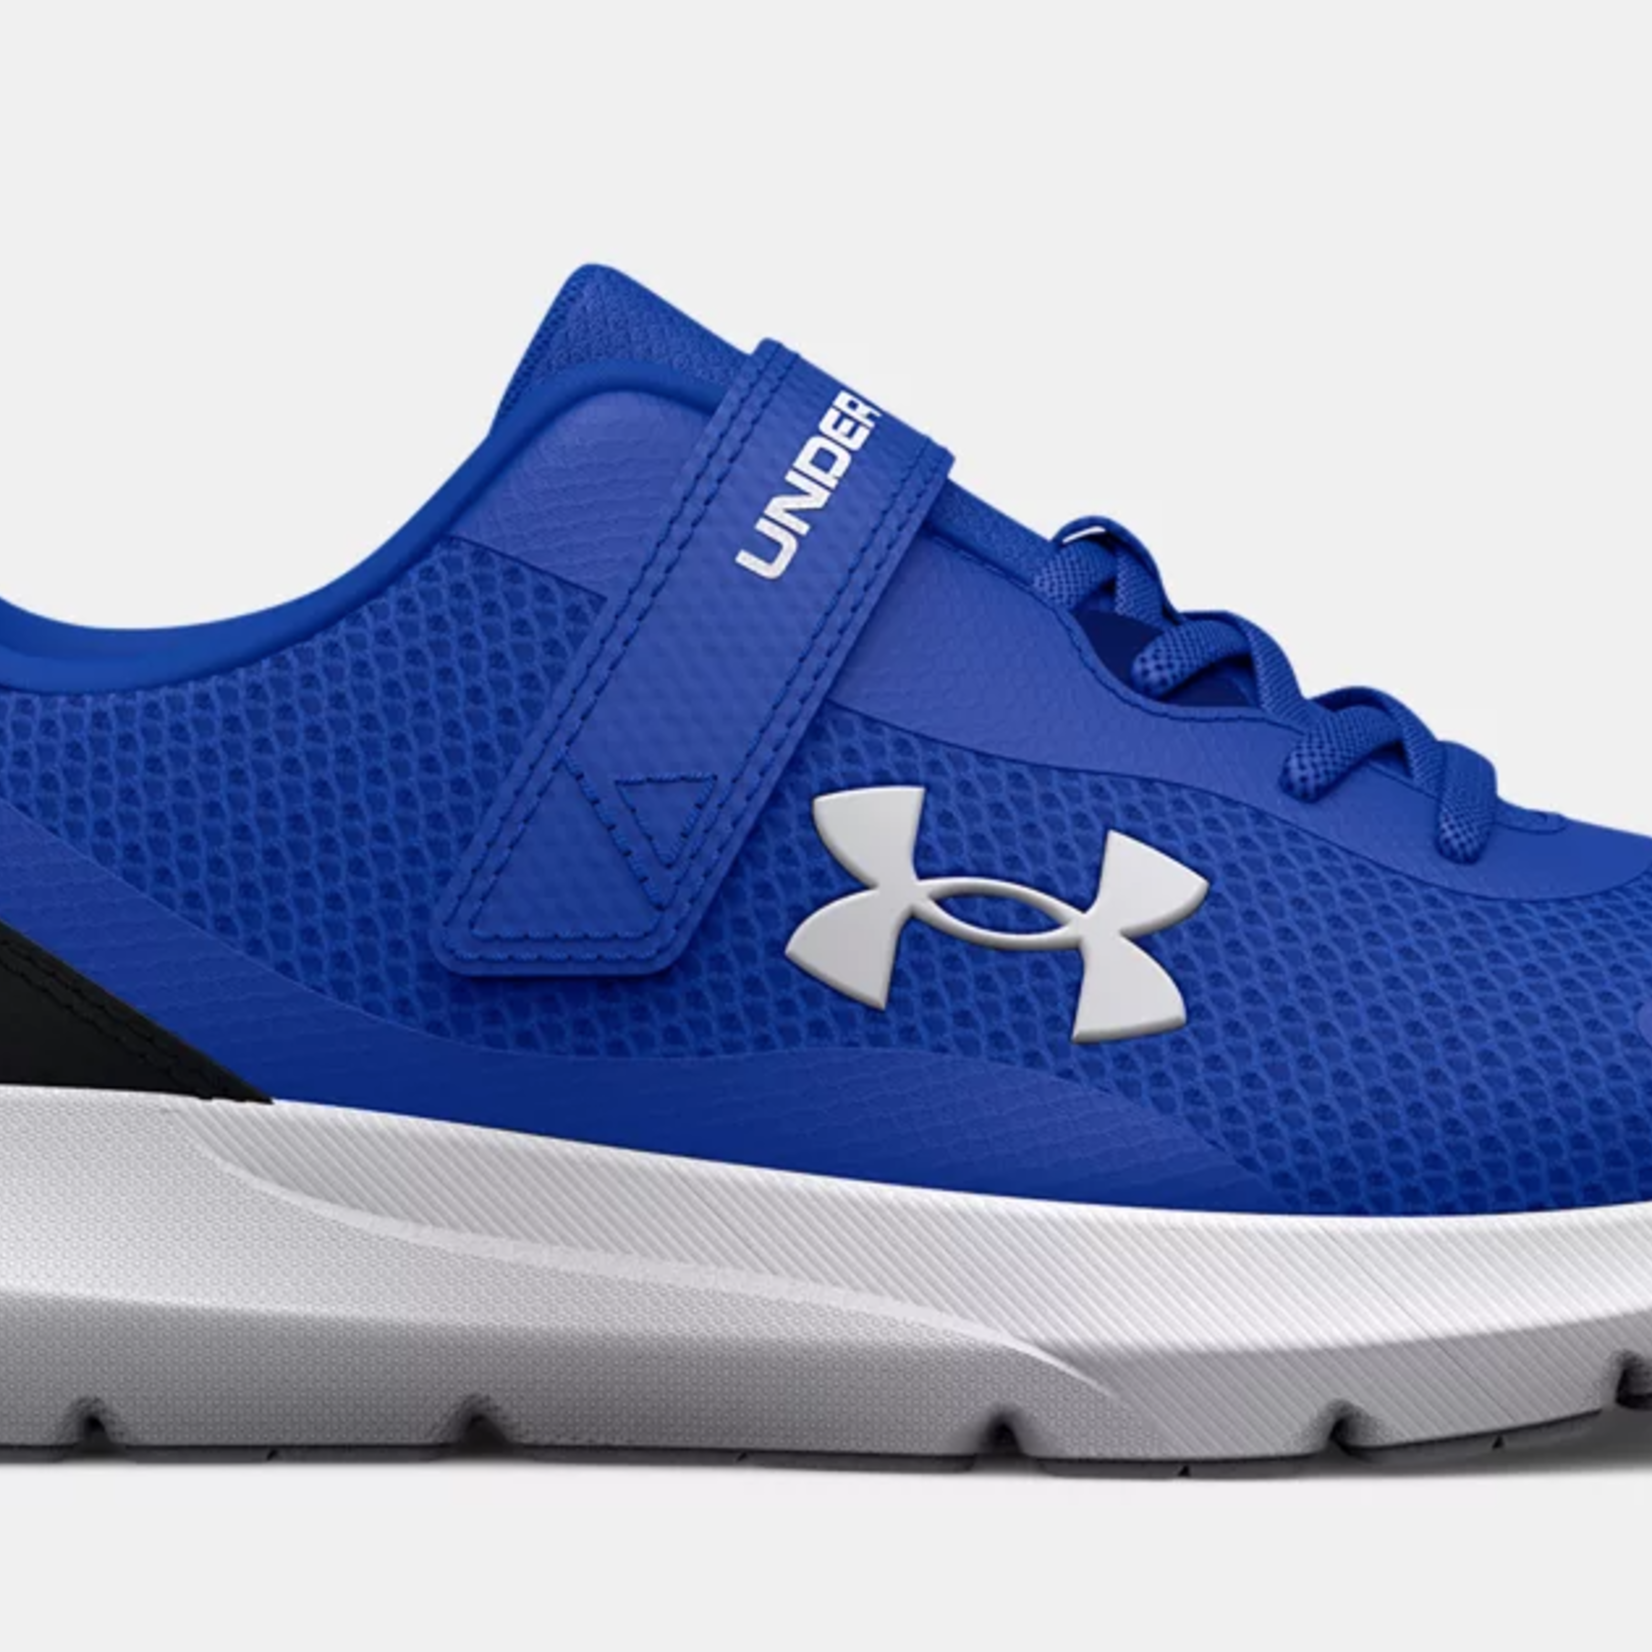 Under Armour Under Armour Running Shoes, Surge 3 AC, BPS, Boys